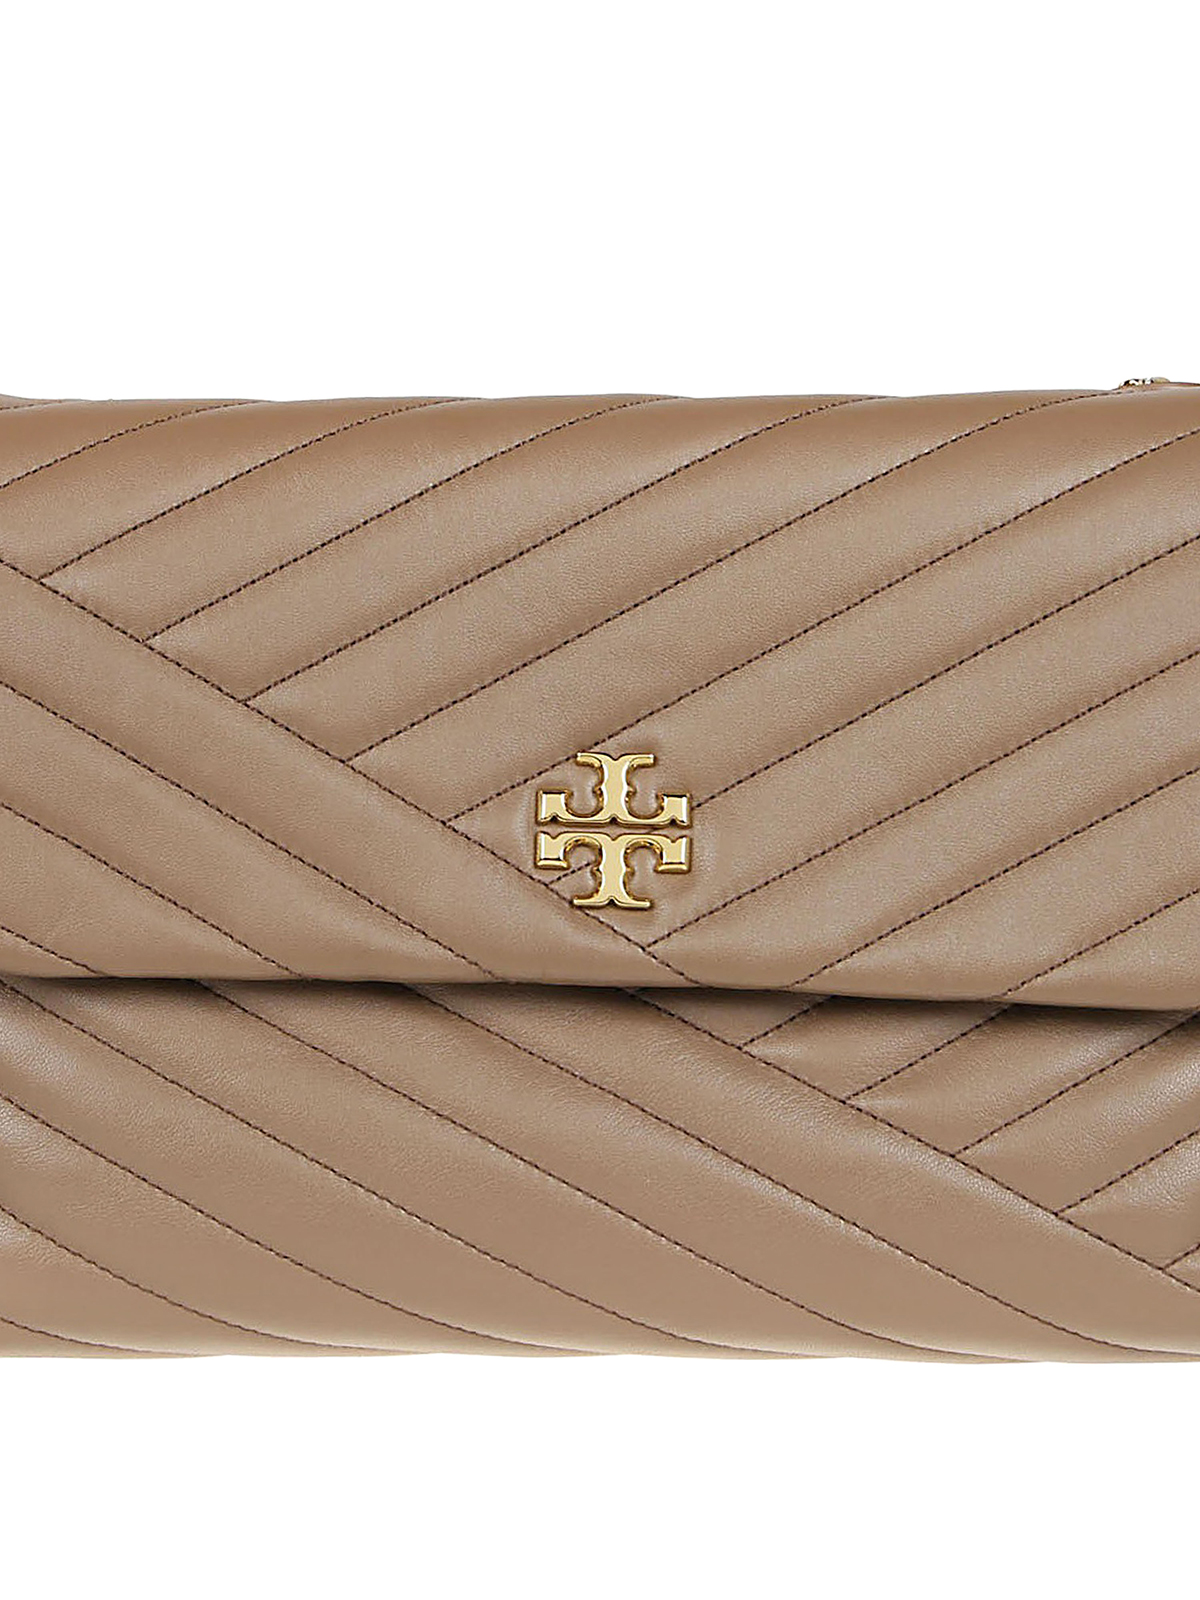 Tory Burch Kira Chevron Quilted Leather Wallet on a Chain Bag Brown